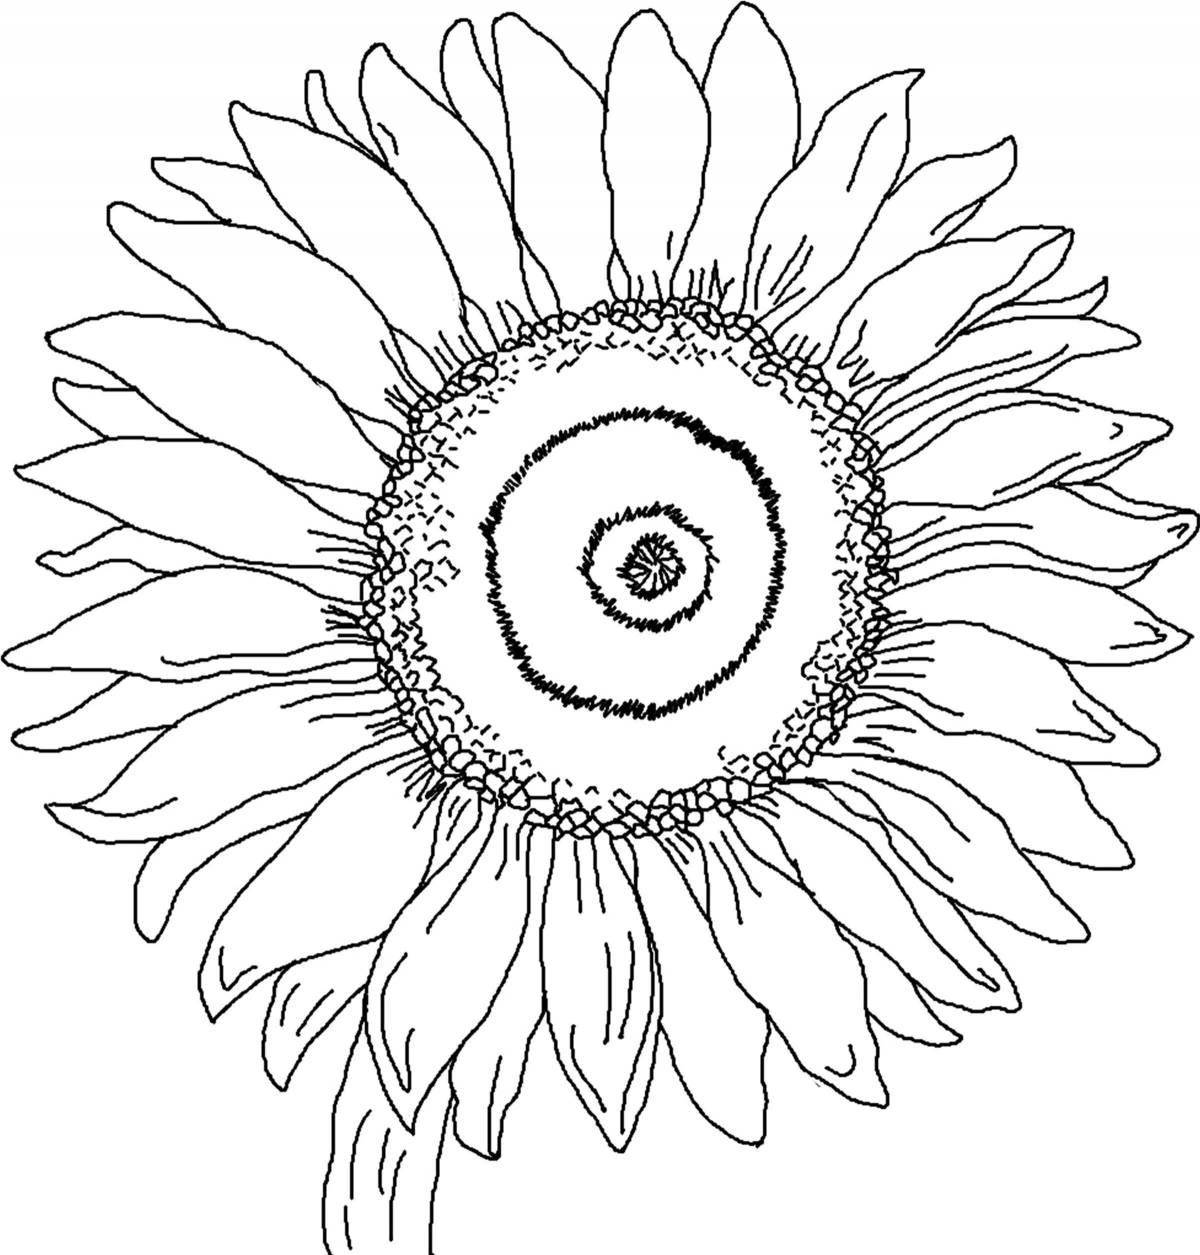 Van Gogh's majestic sunflowers coloring page